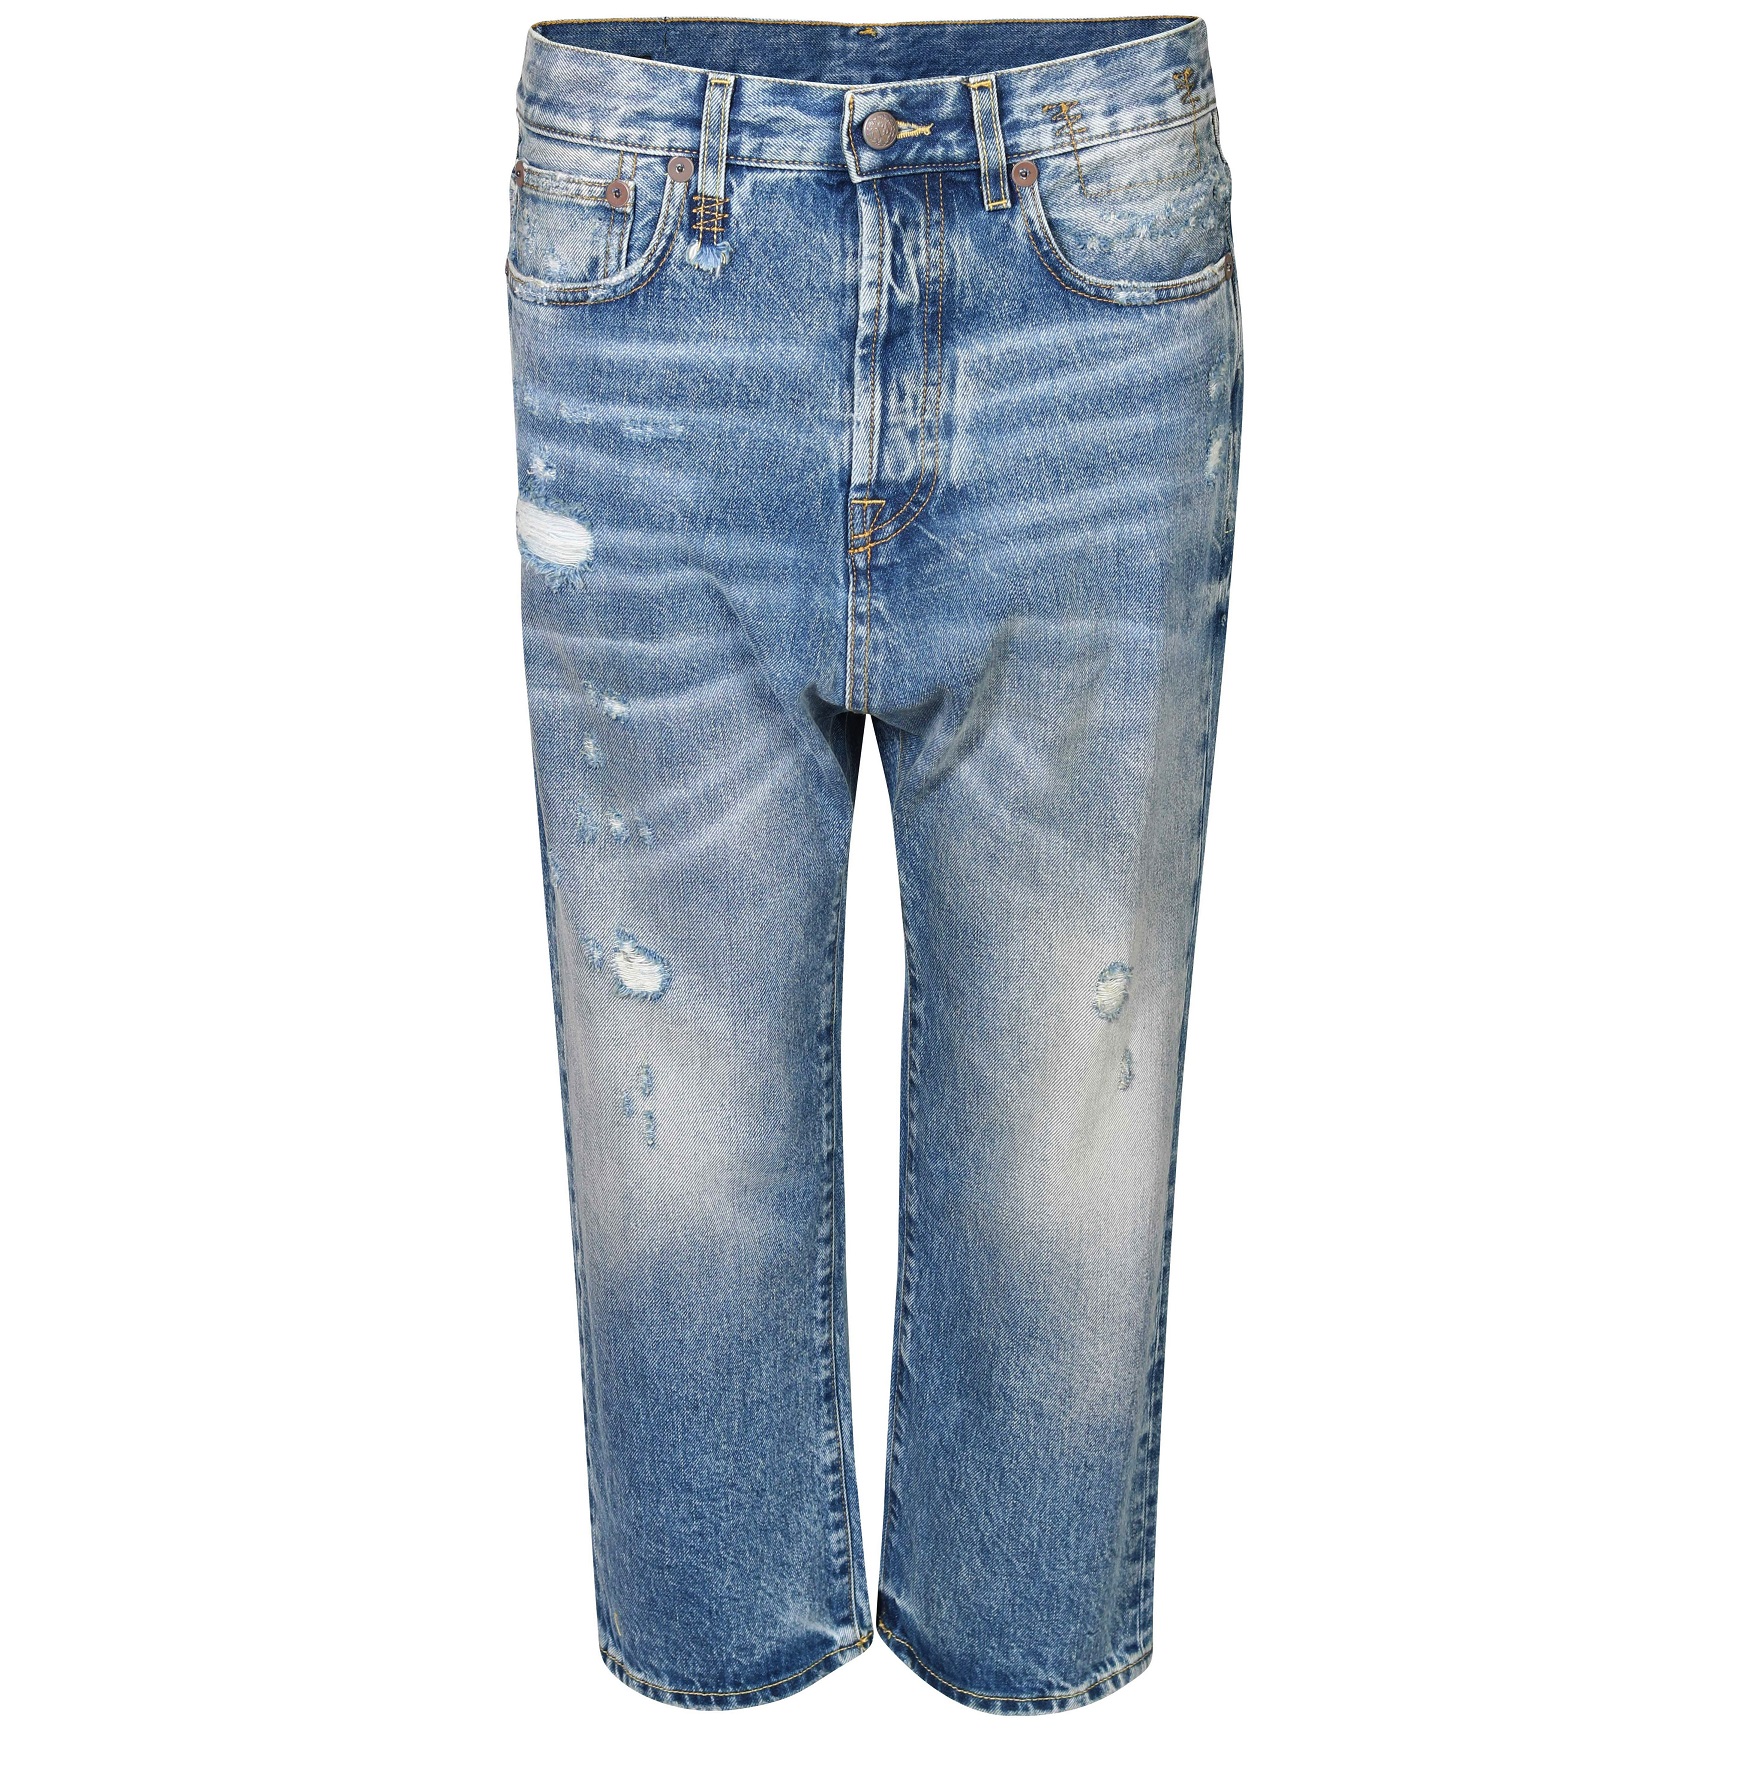 R13 Tailored Drop Jeans in Bain Washing